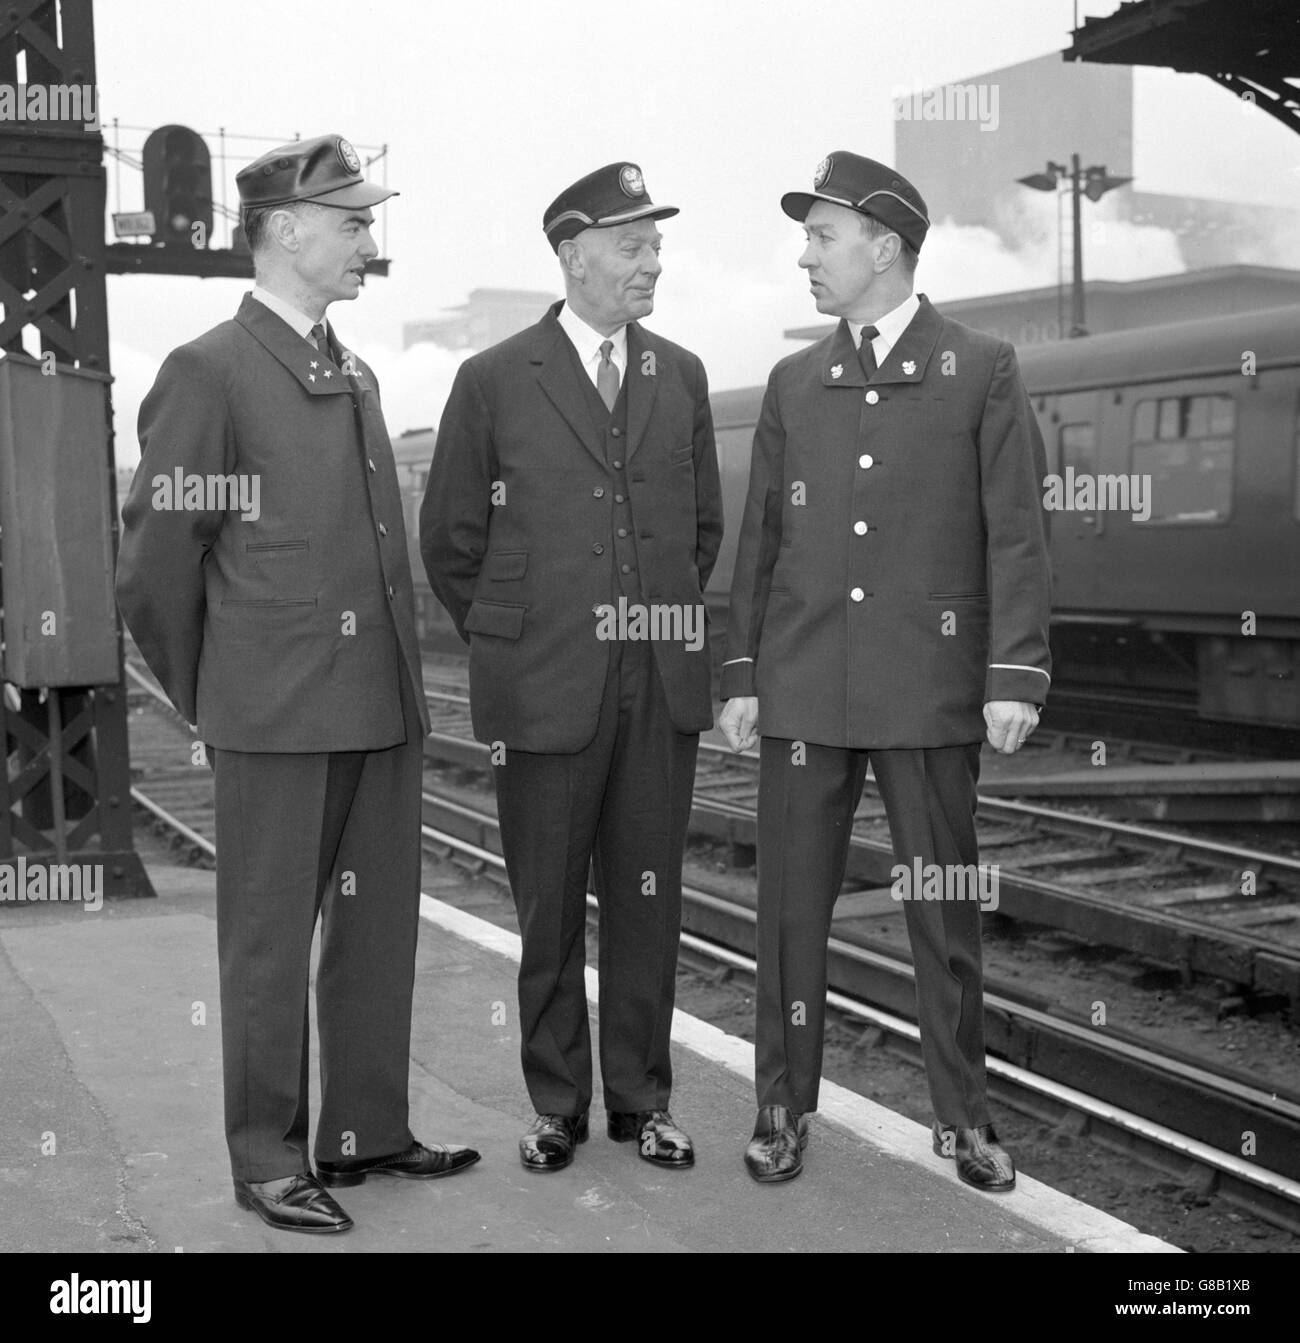 Rail r Black and White Stock Photos & Images - Alamy